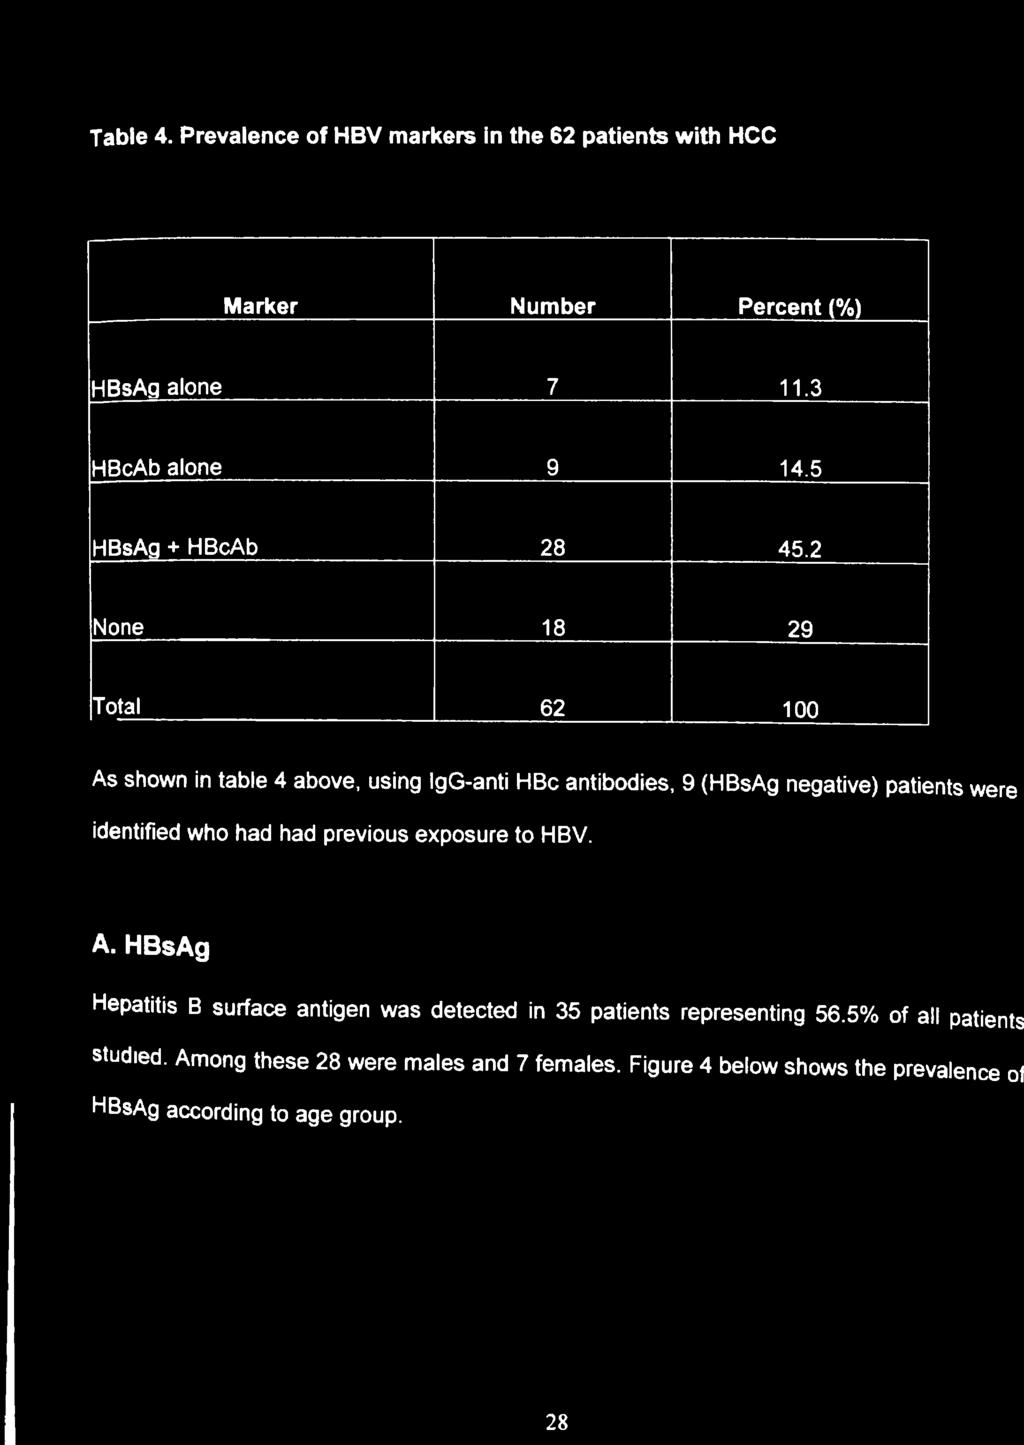 2 None 18 29 Total 62 100 As shown in table 4 above, using IgG-anti HBc antibodies, 9 (HBsAg negative) patients were identified who